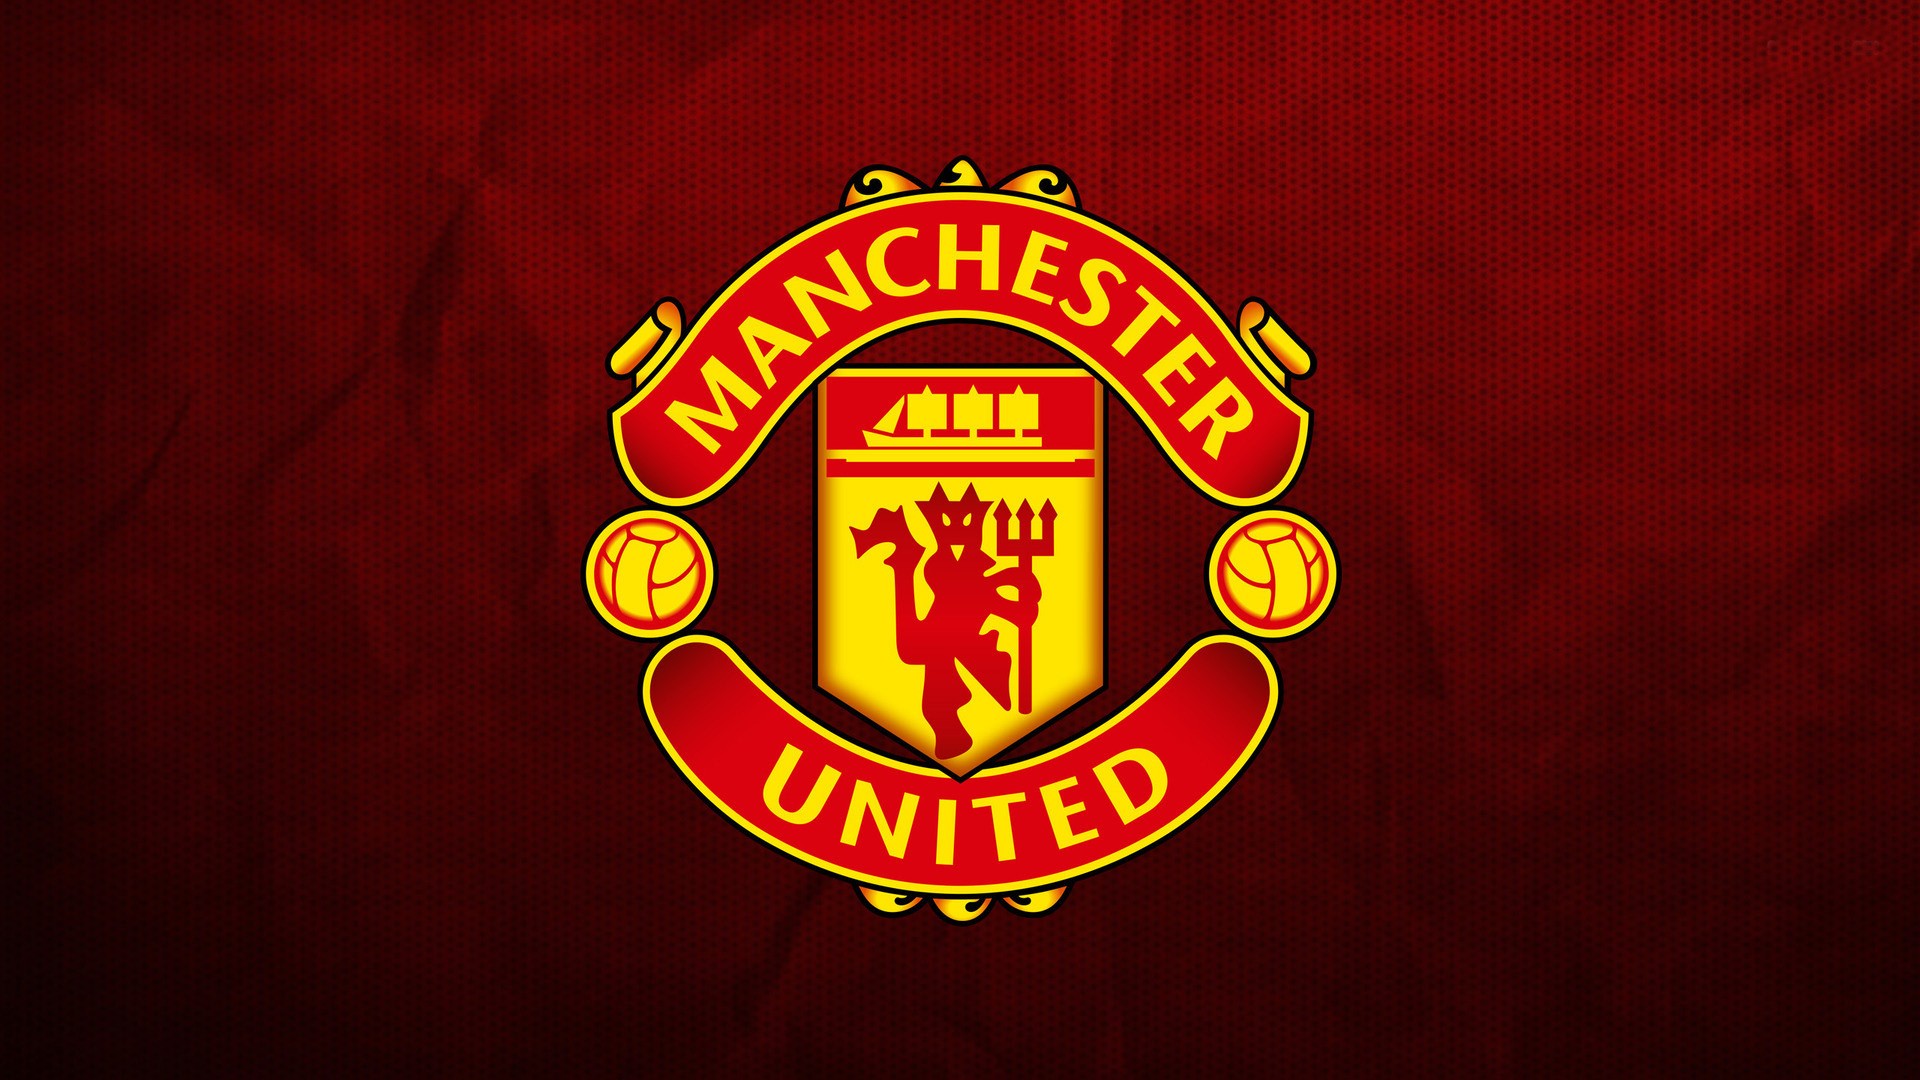 45 Manchester United Wallpapers 1920x1080 On Wallpapersafari